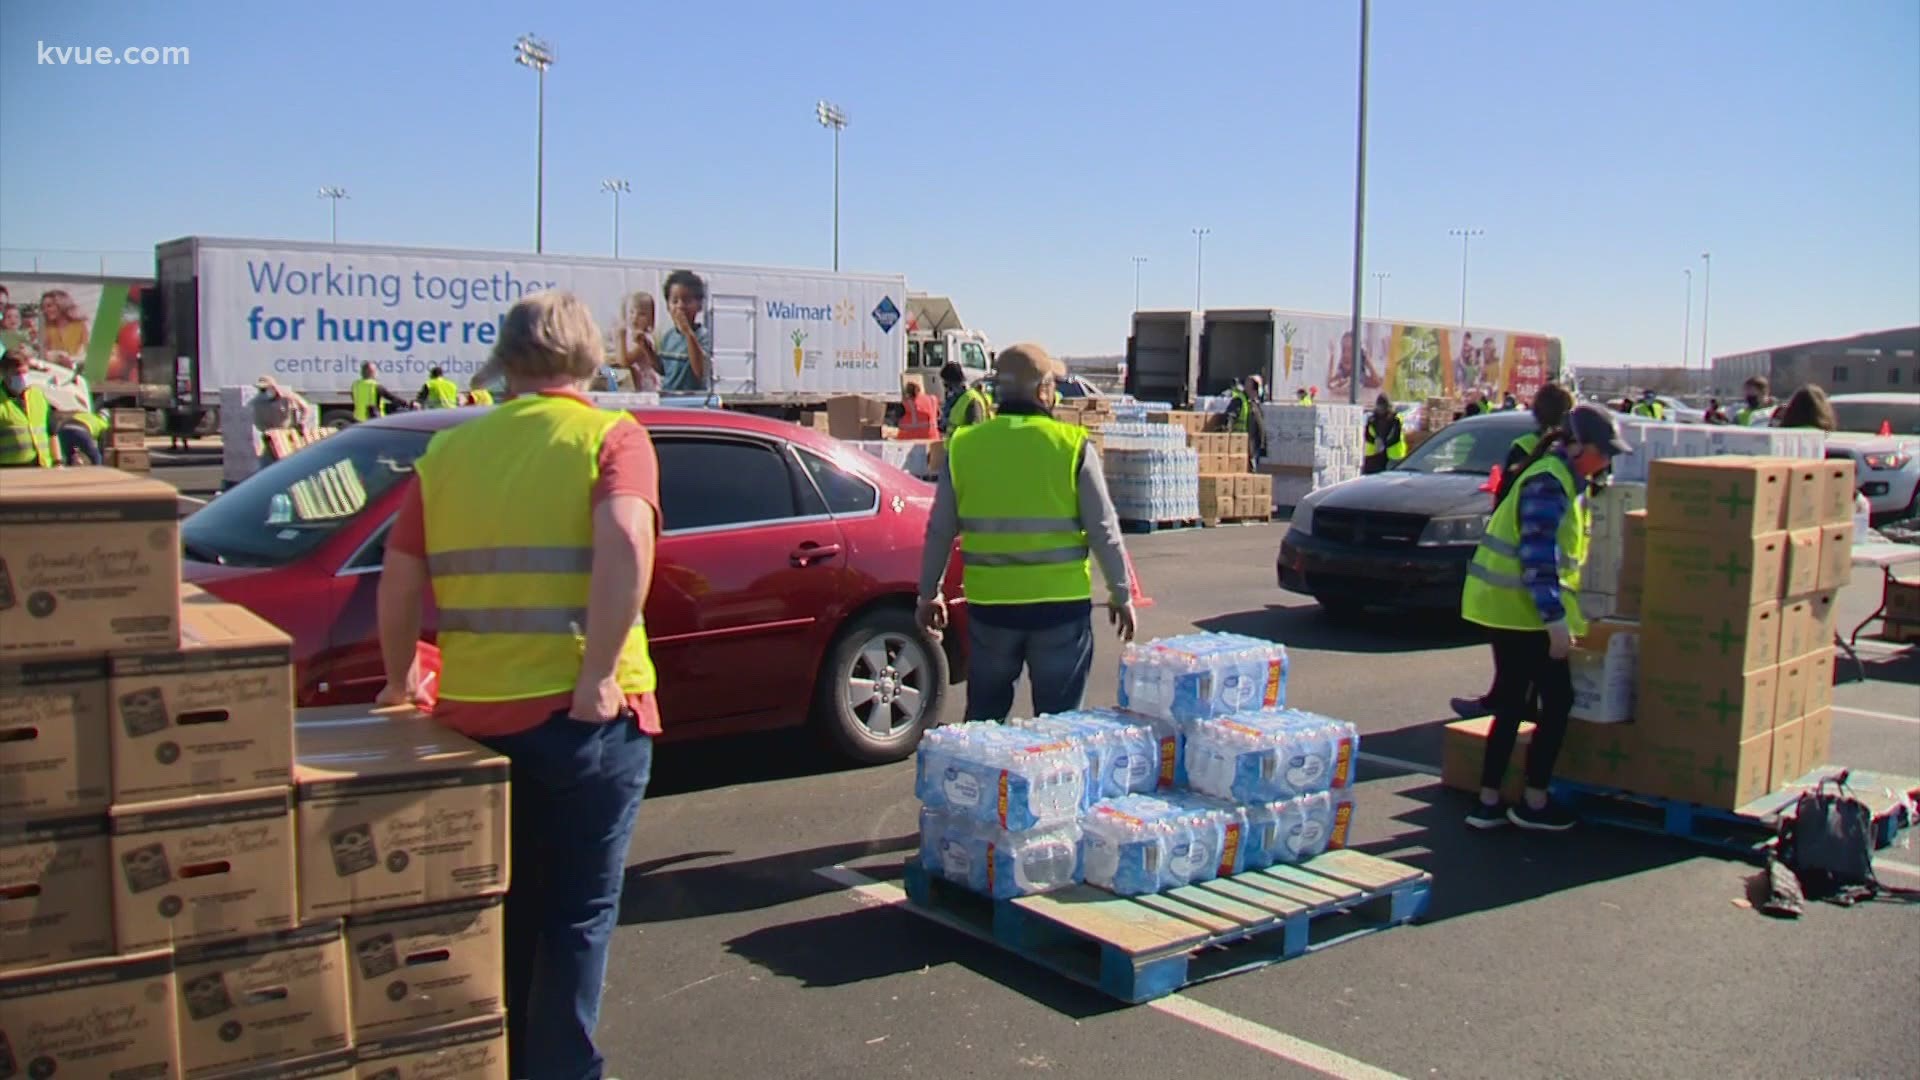 Thousands were served at a food distribution event as the winter storms increased demand. The drive-up event happened at Del Valle High School.